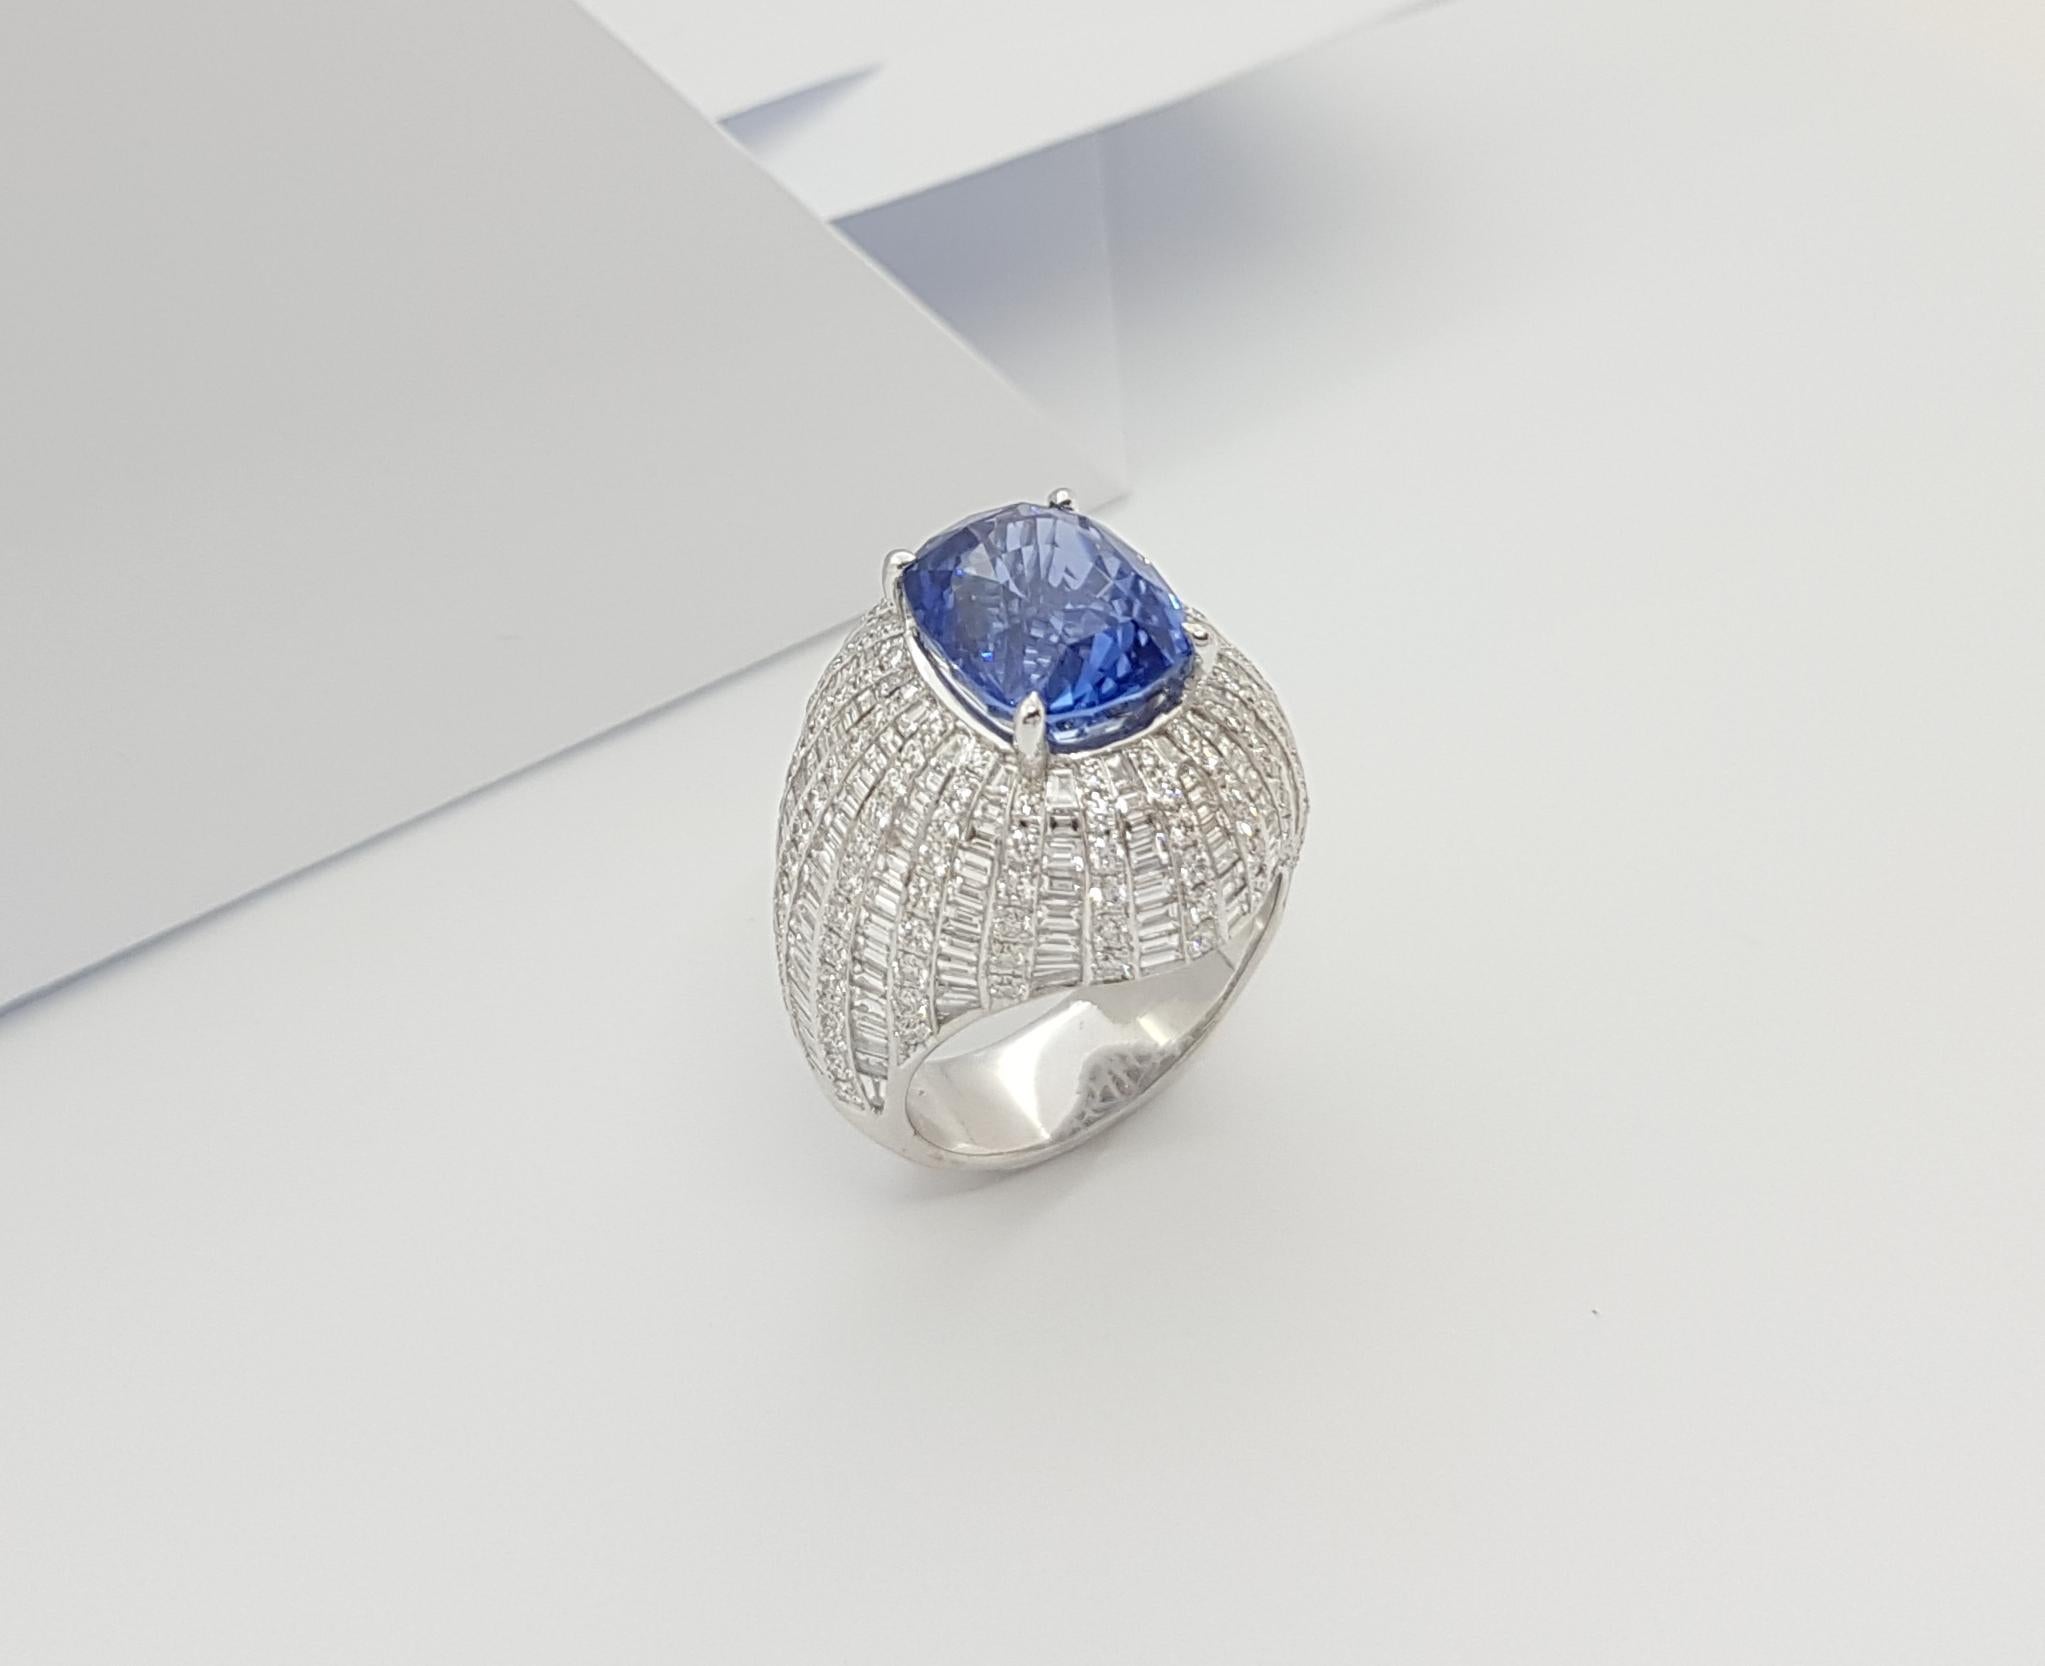 GIA Certified 8cts Ceylon Blue Sapphire with Diamond Ring Set in 18K White Gold For Sale 6